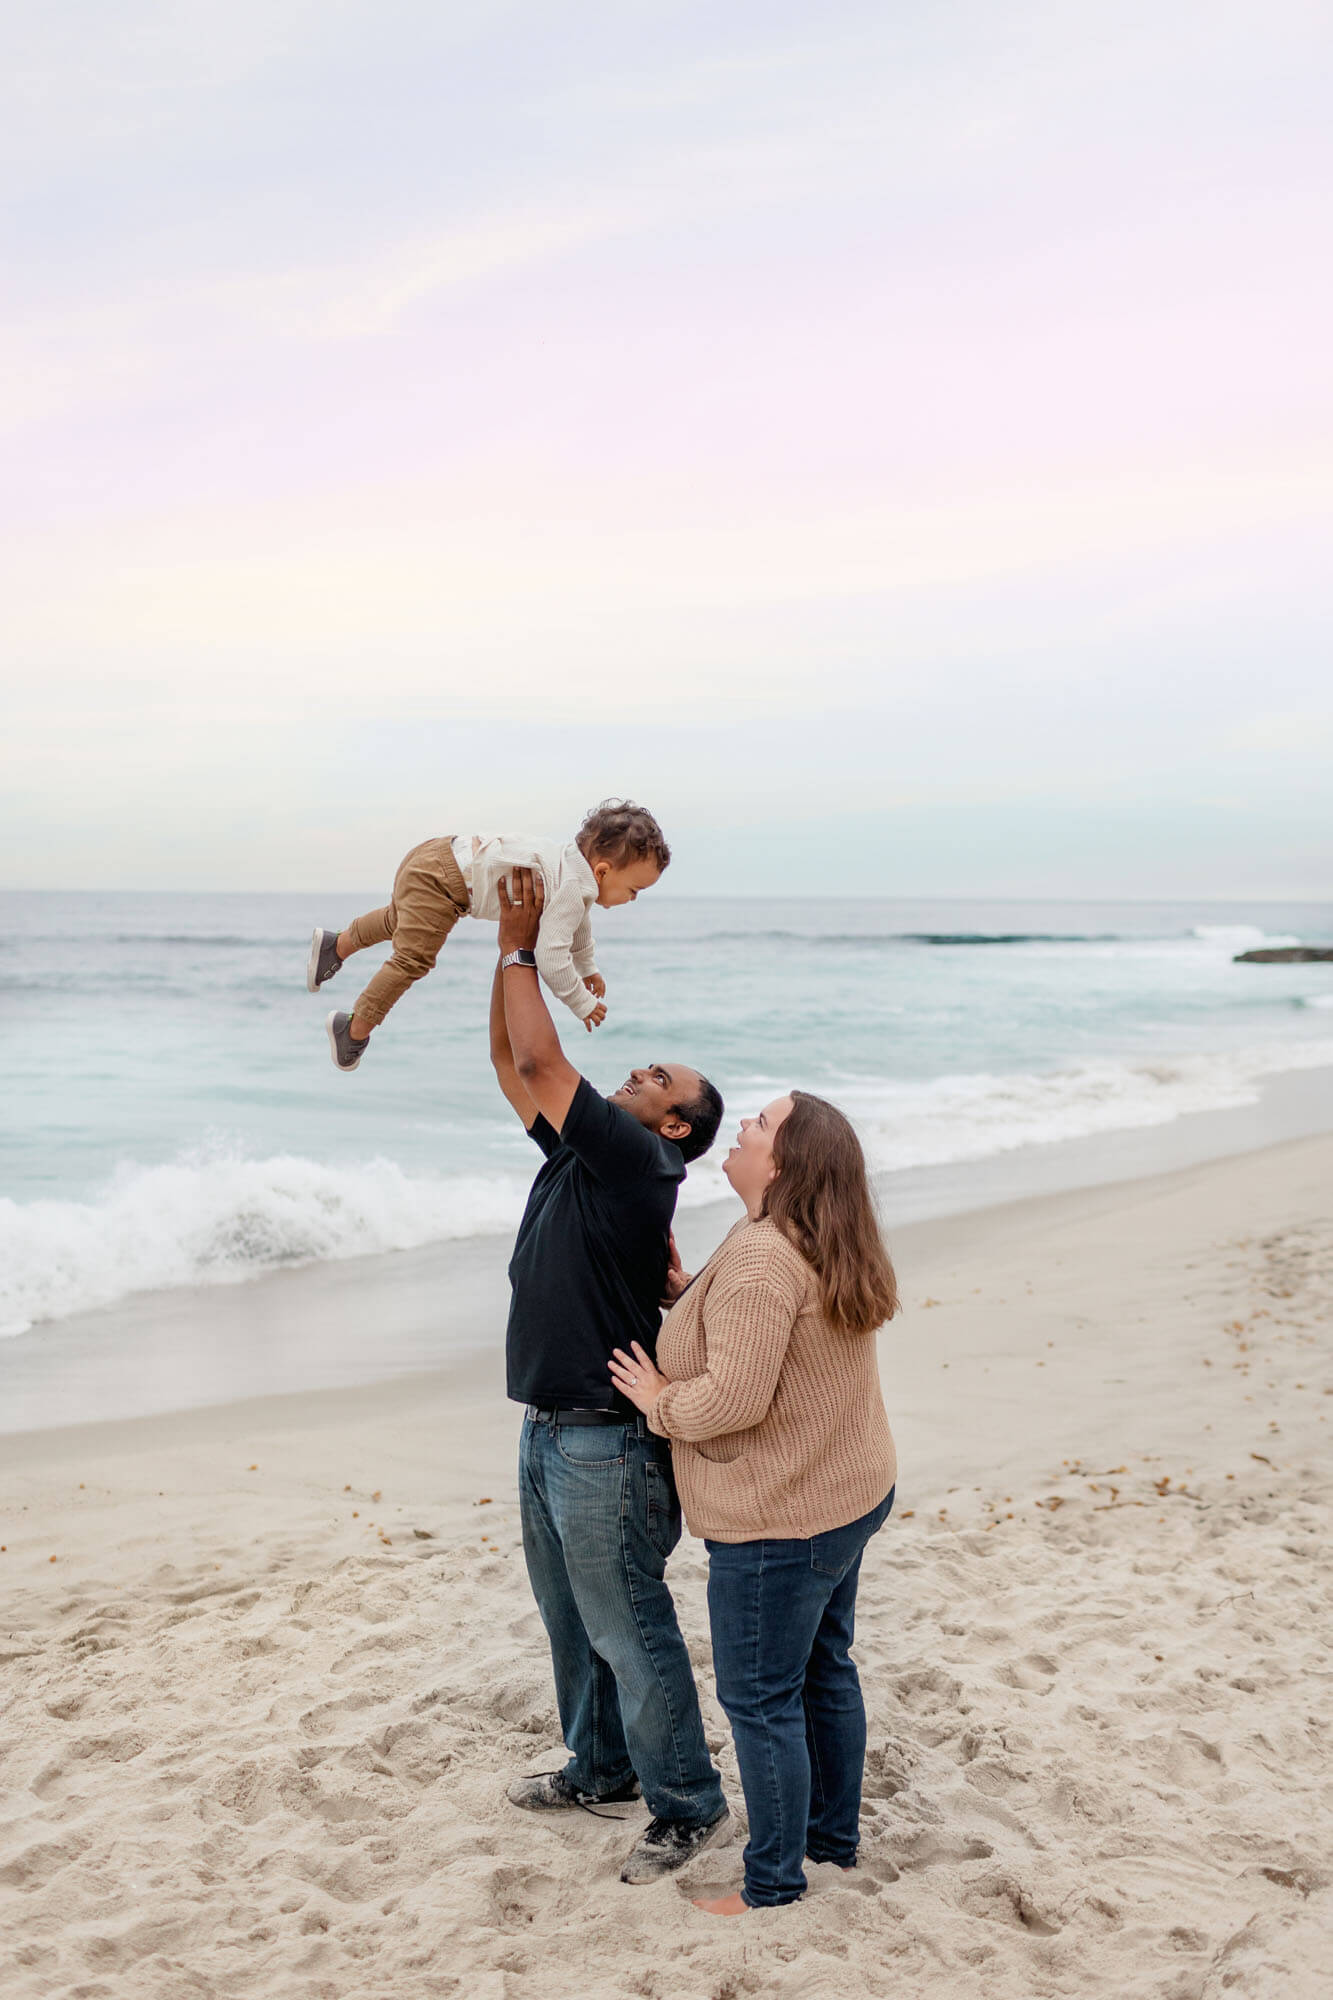 Number 1 spot for Best Locations for San Diego Family Photos by San Diego Family Photographer